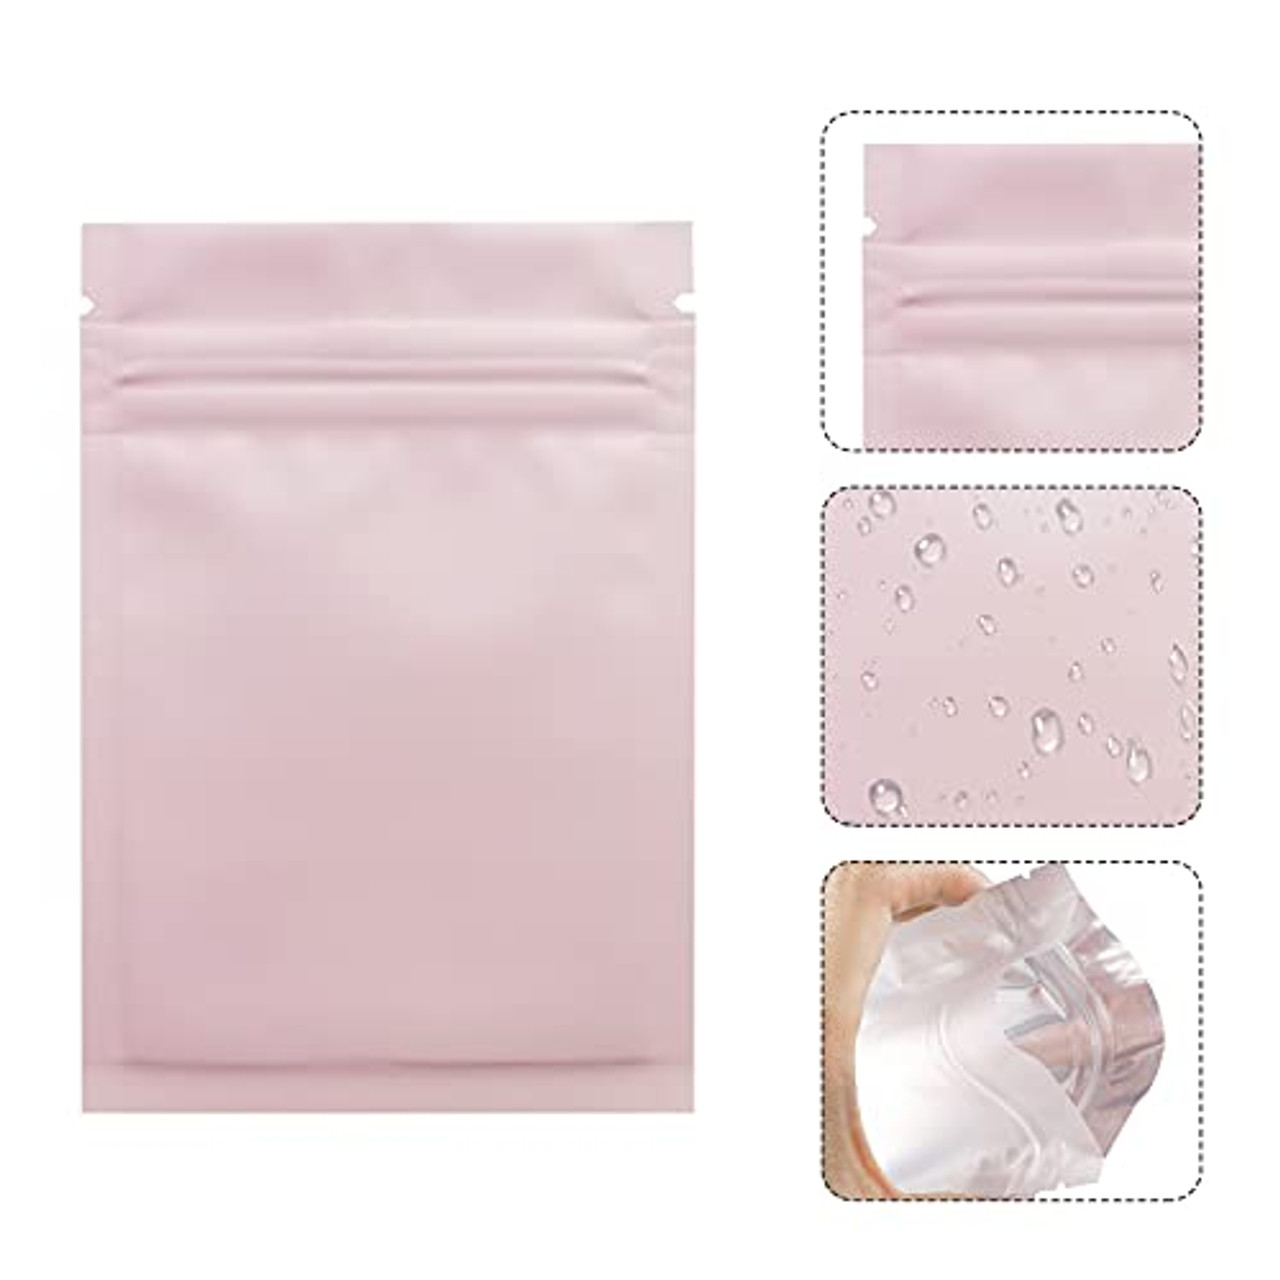 Reusable Zip Lock Sealing Bags, 100PCS Double Sided Holographic Color Smell  Proof Bags Foil Pouch Bags (Pink, 2 x 3 inch)